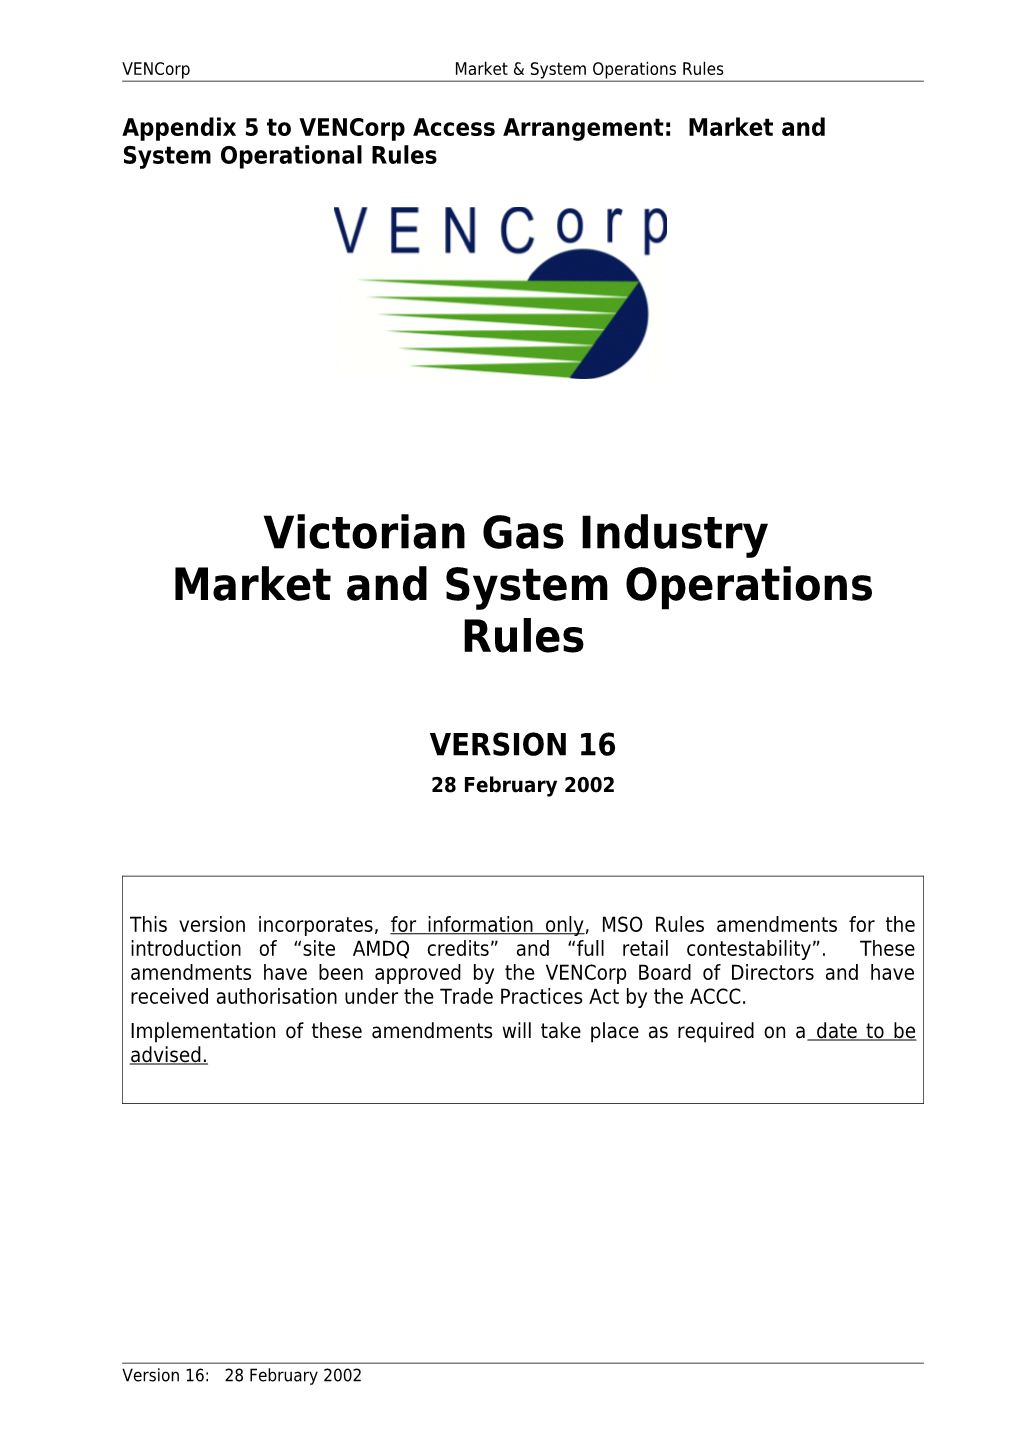 Appendix 5 to Vencorp Access Arrangement: Market and System Operational Rules